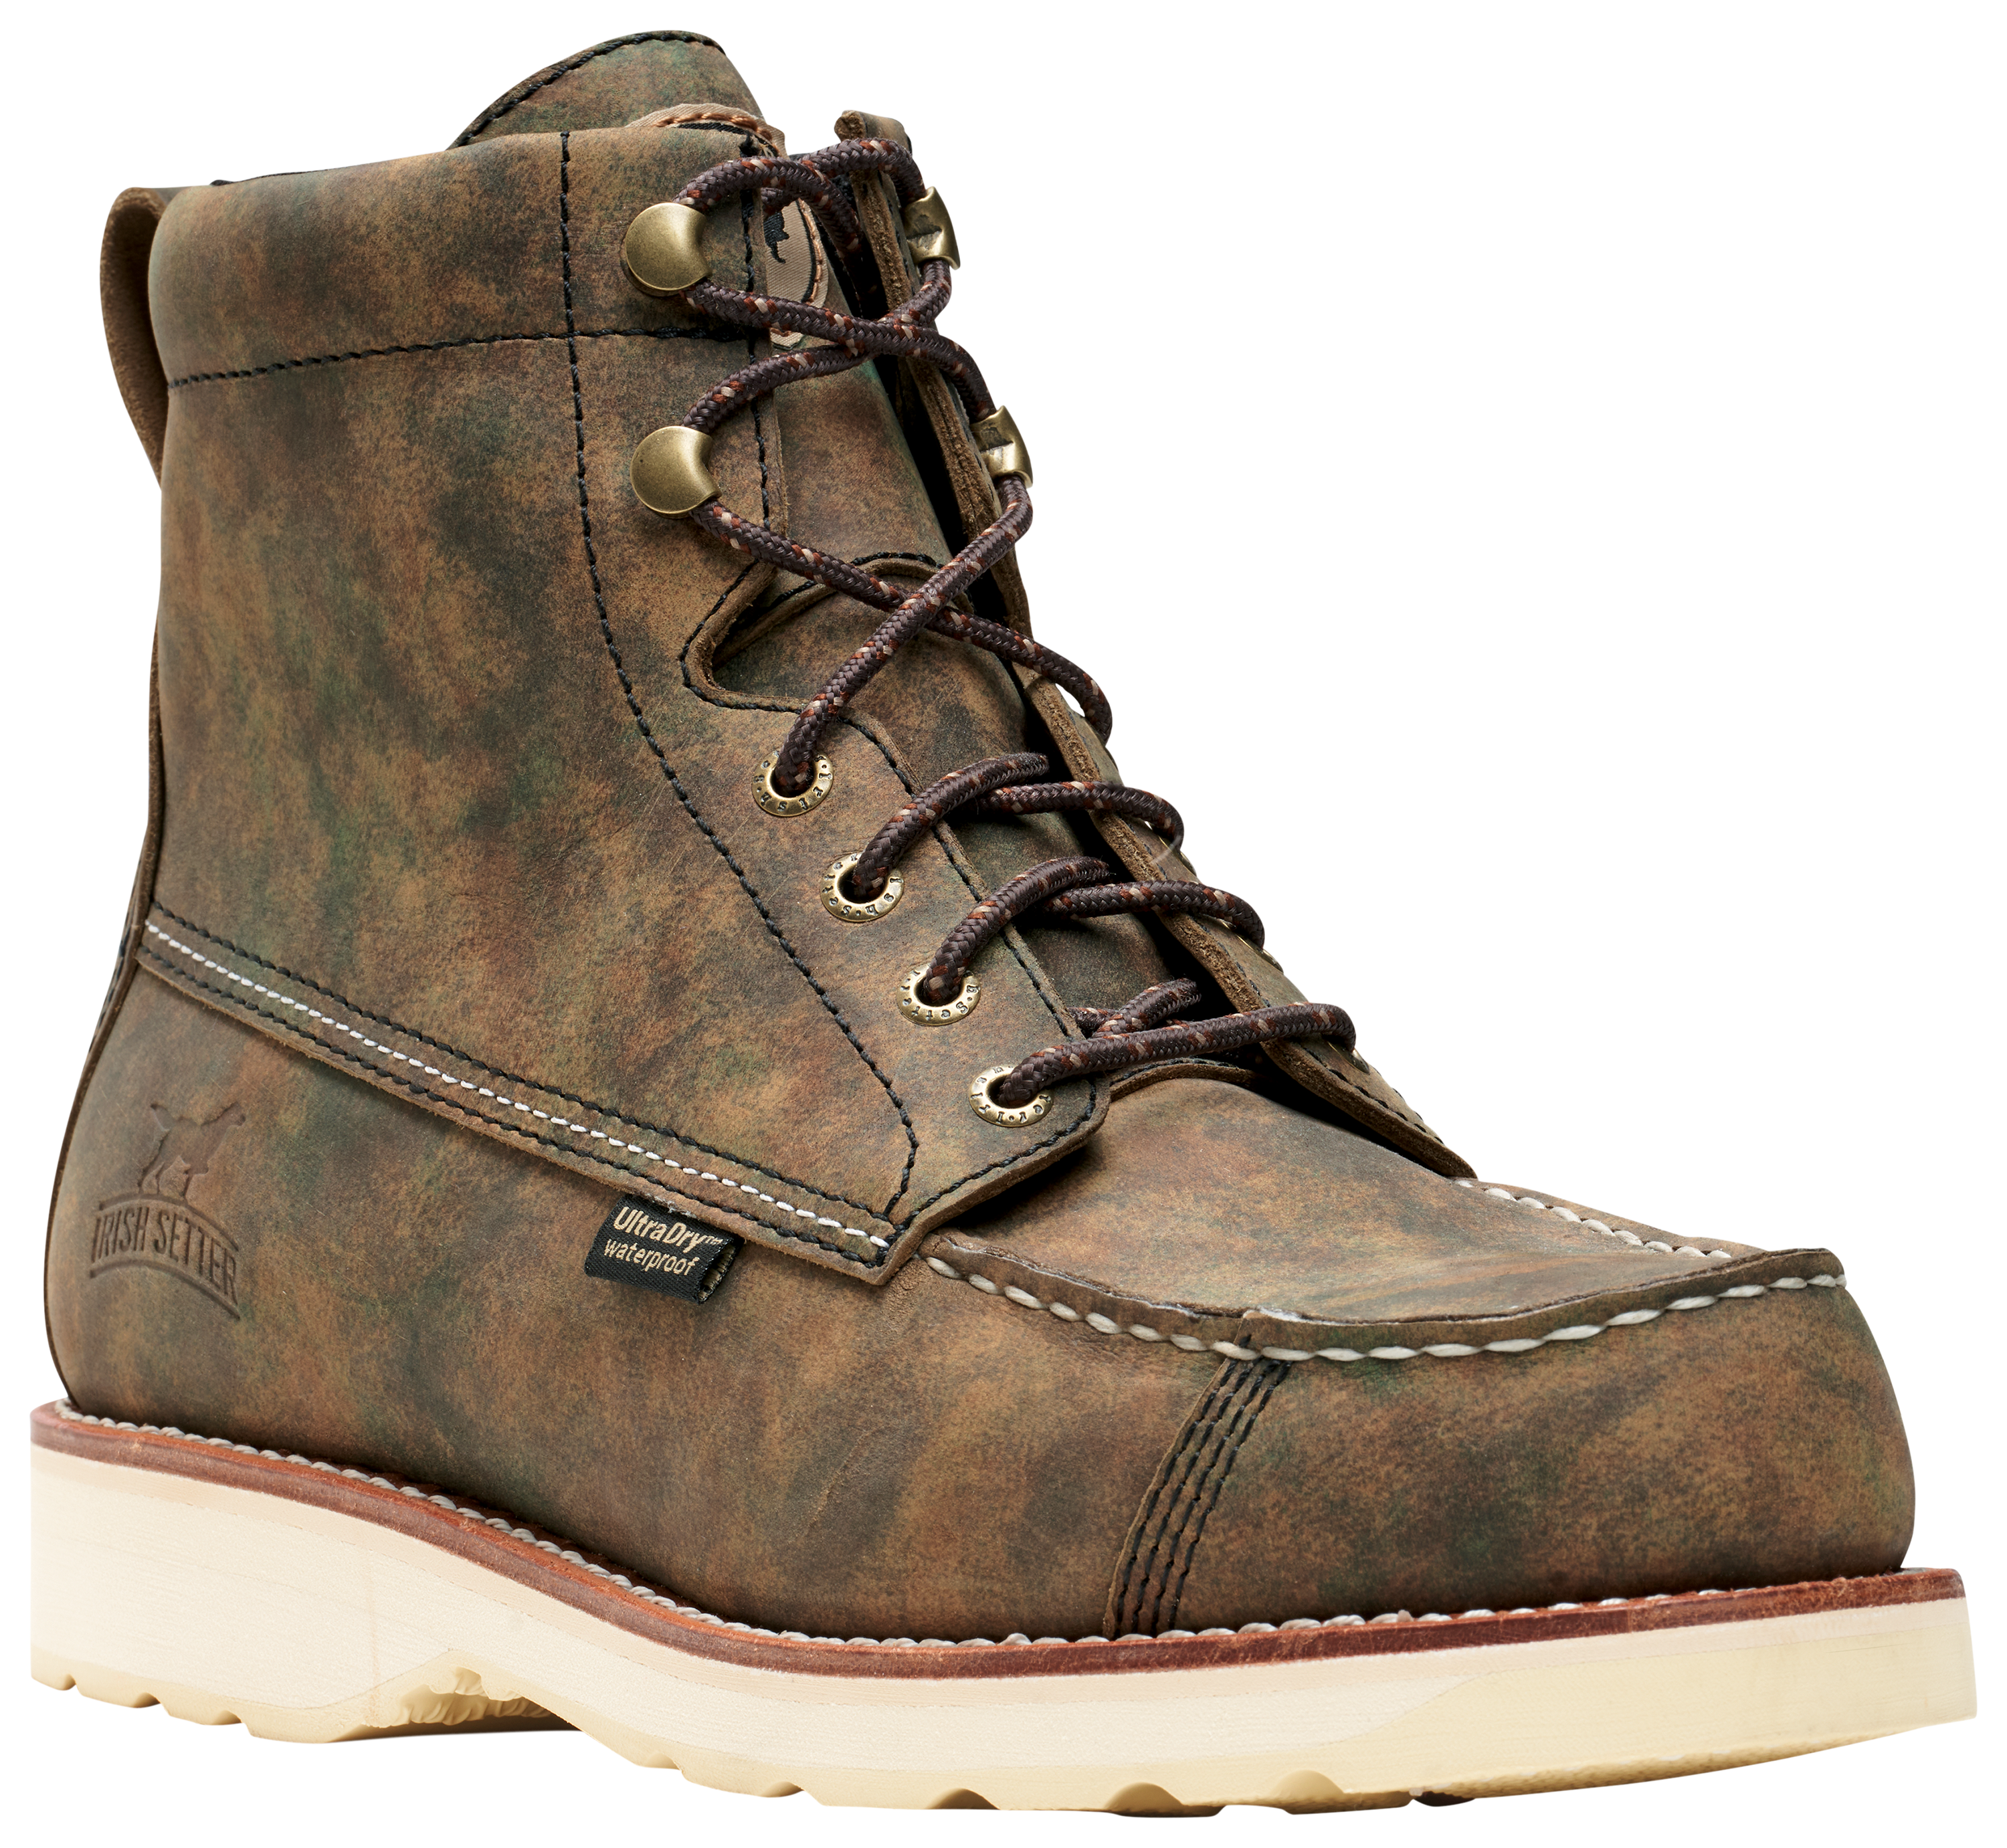 Irish Setter Wingshooter 7 Waterproof Hunting Boots for Men - Earth Camo - 12M